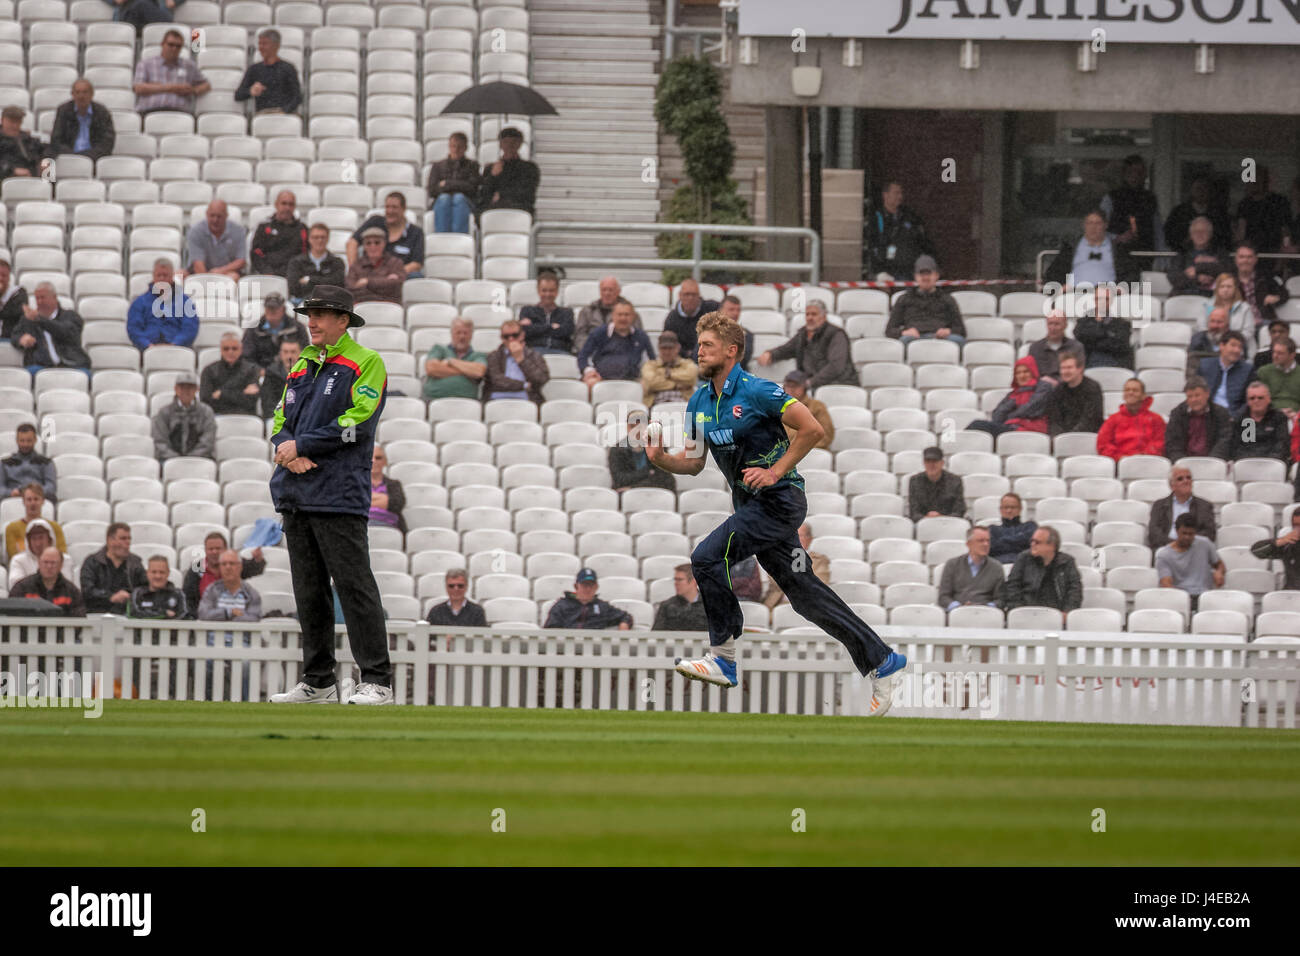 London, UK. 12th May, 2017. Ivan Thomas bowling in the rain for Kent against Surrey at The Oval Credit: Philip Pound/Alamy Live News Stock Photo